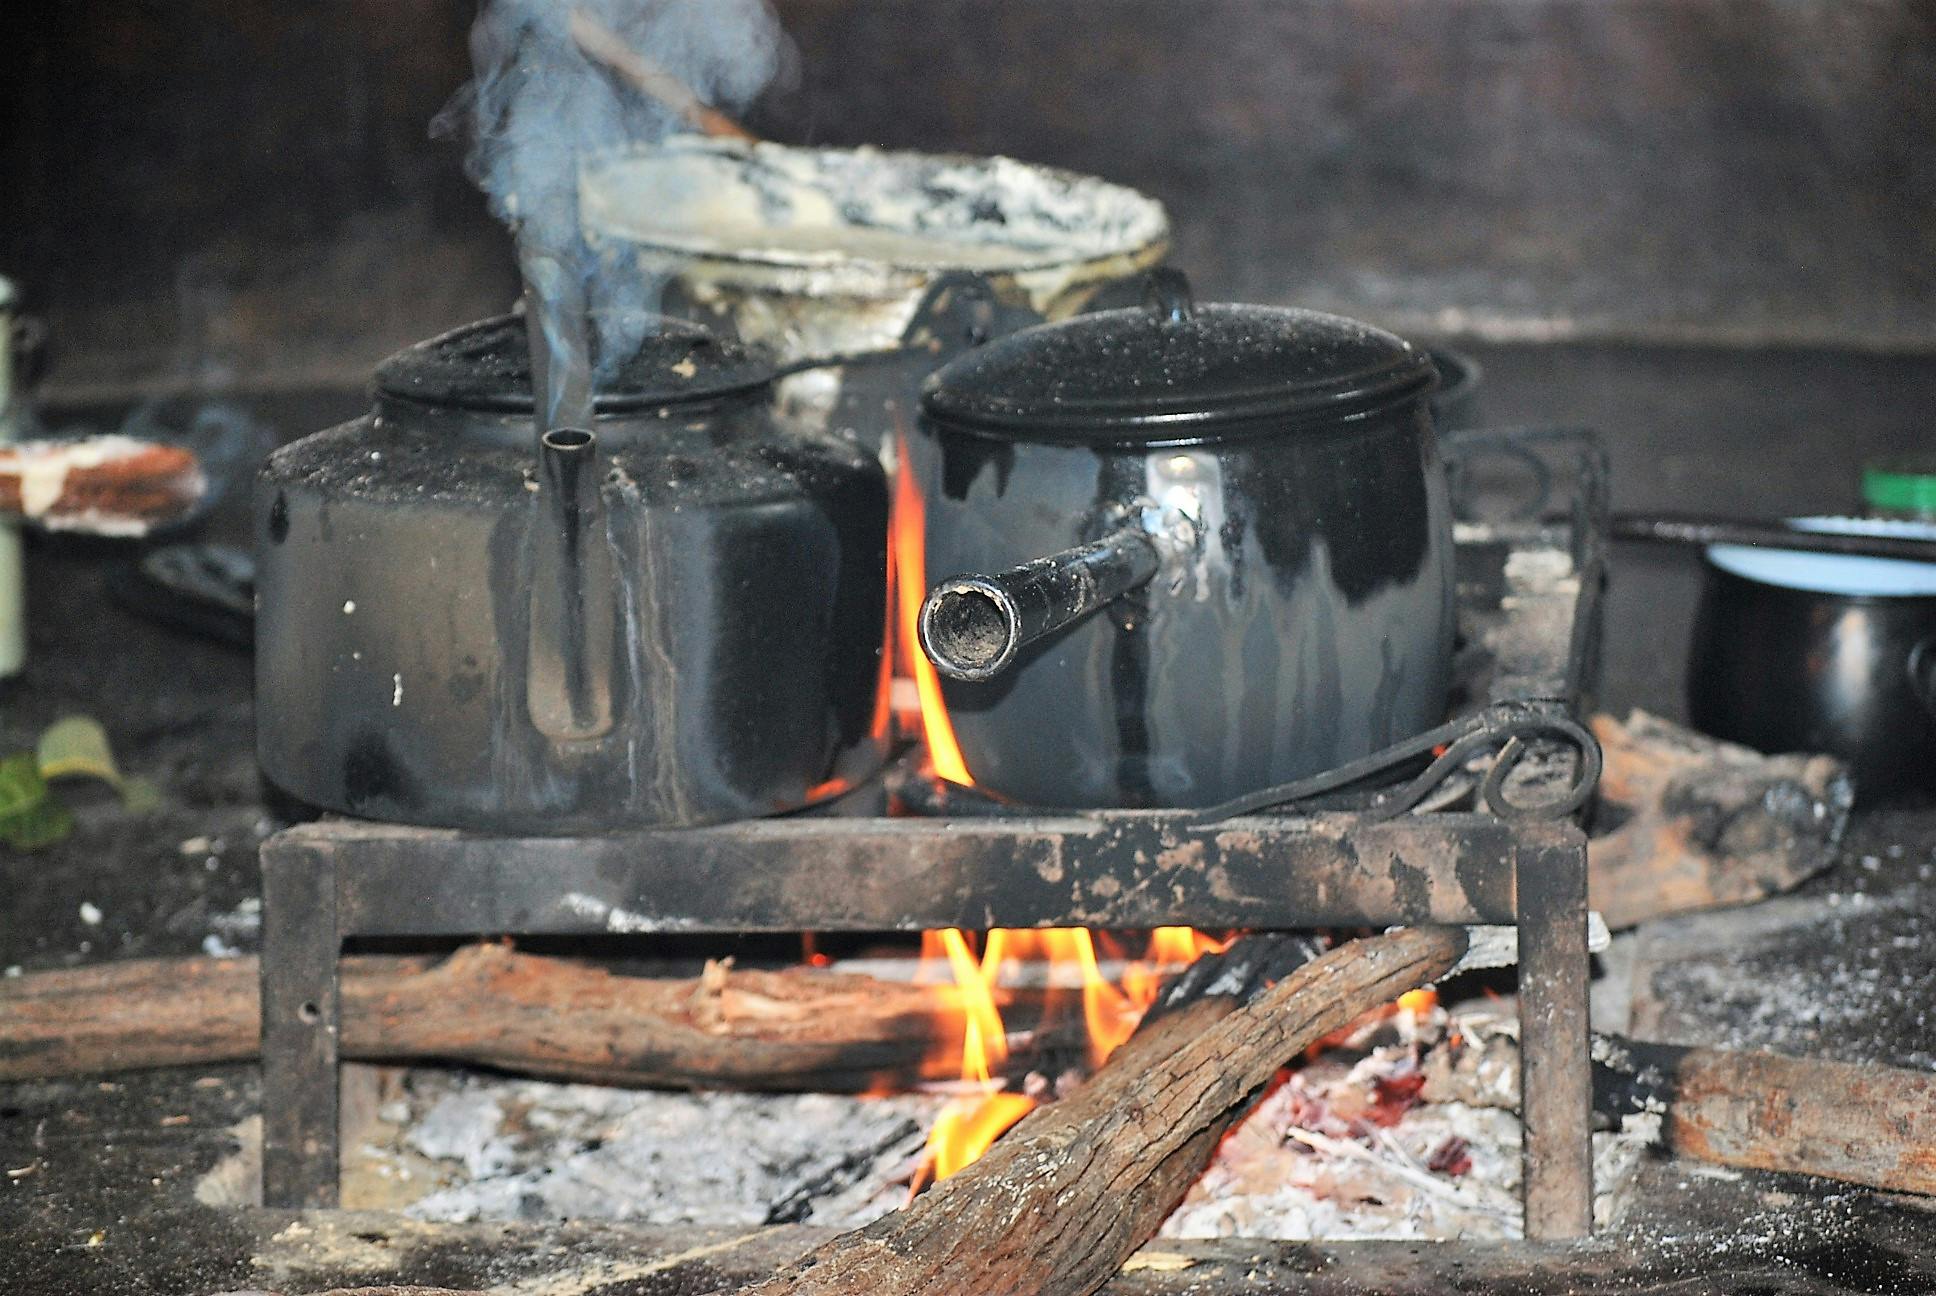 Free stock photo of Cooking on open fire